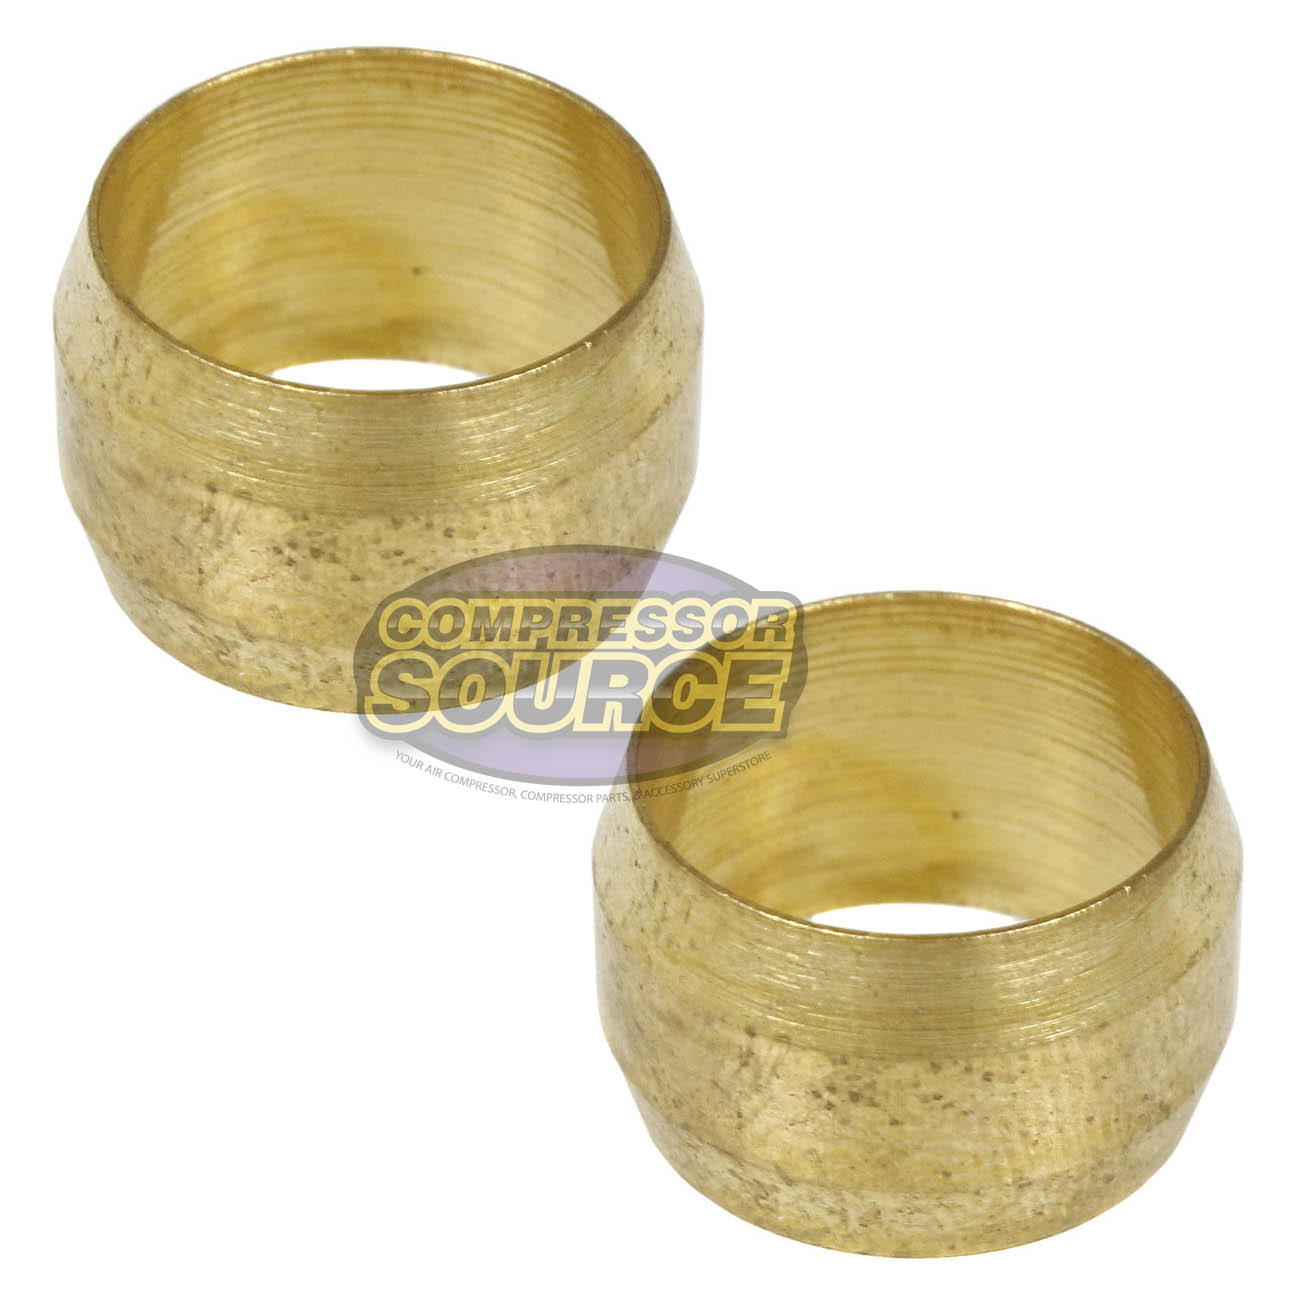 2 Pack 1/2" Compression Sleeve Solid Brass Ferrule for 1/2" Compression Tubing